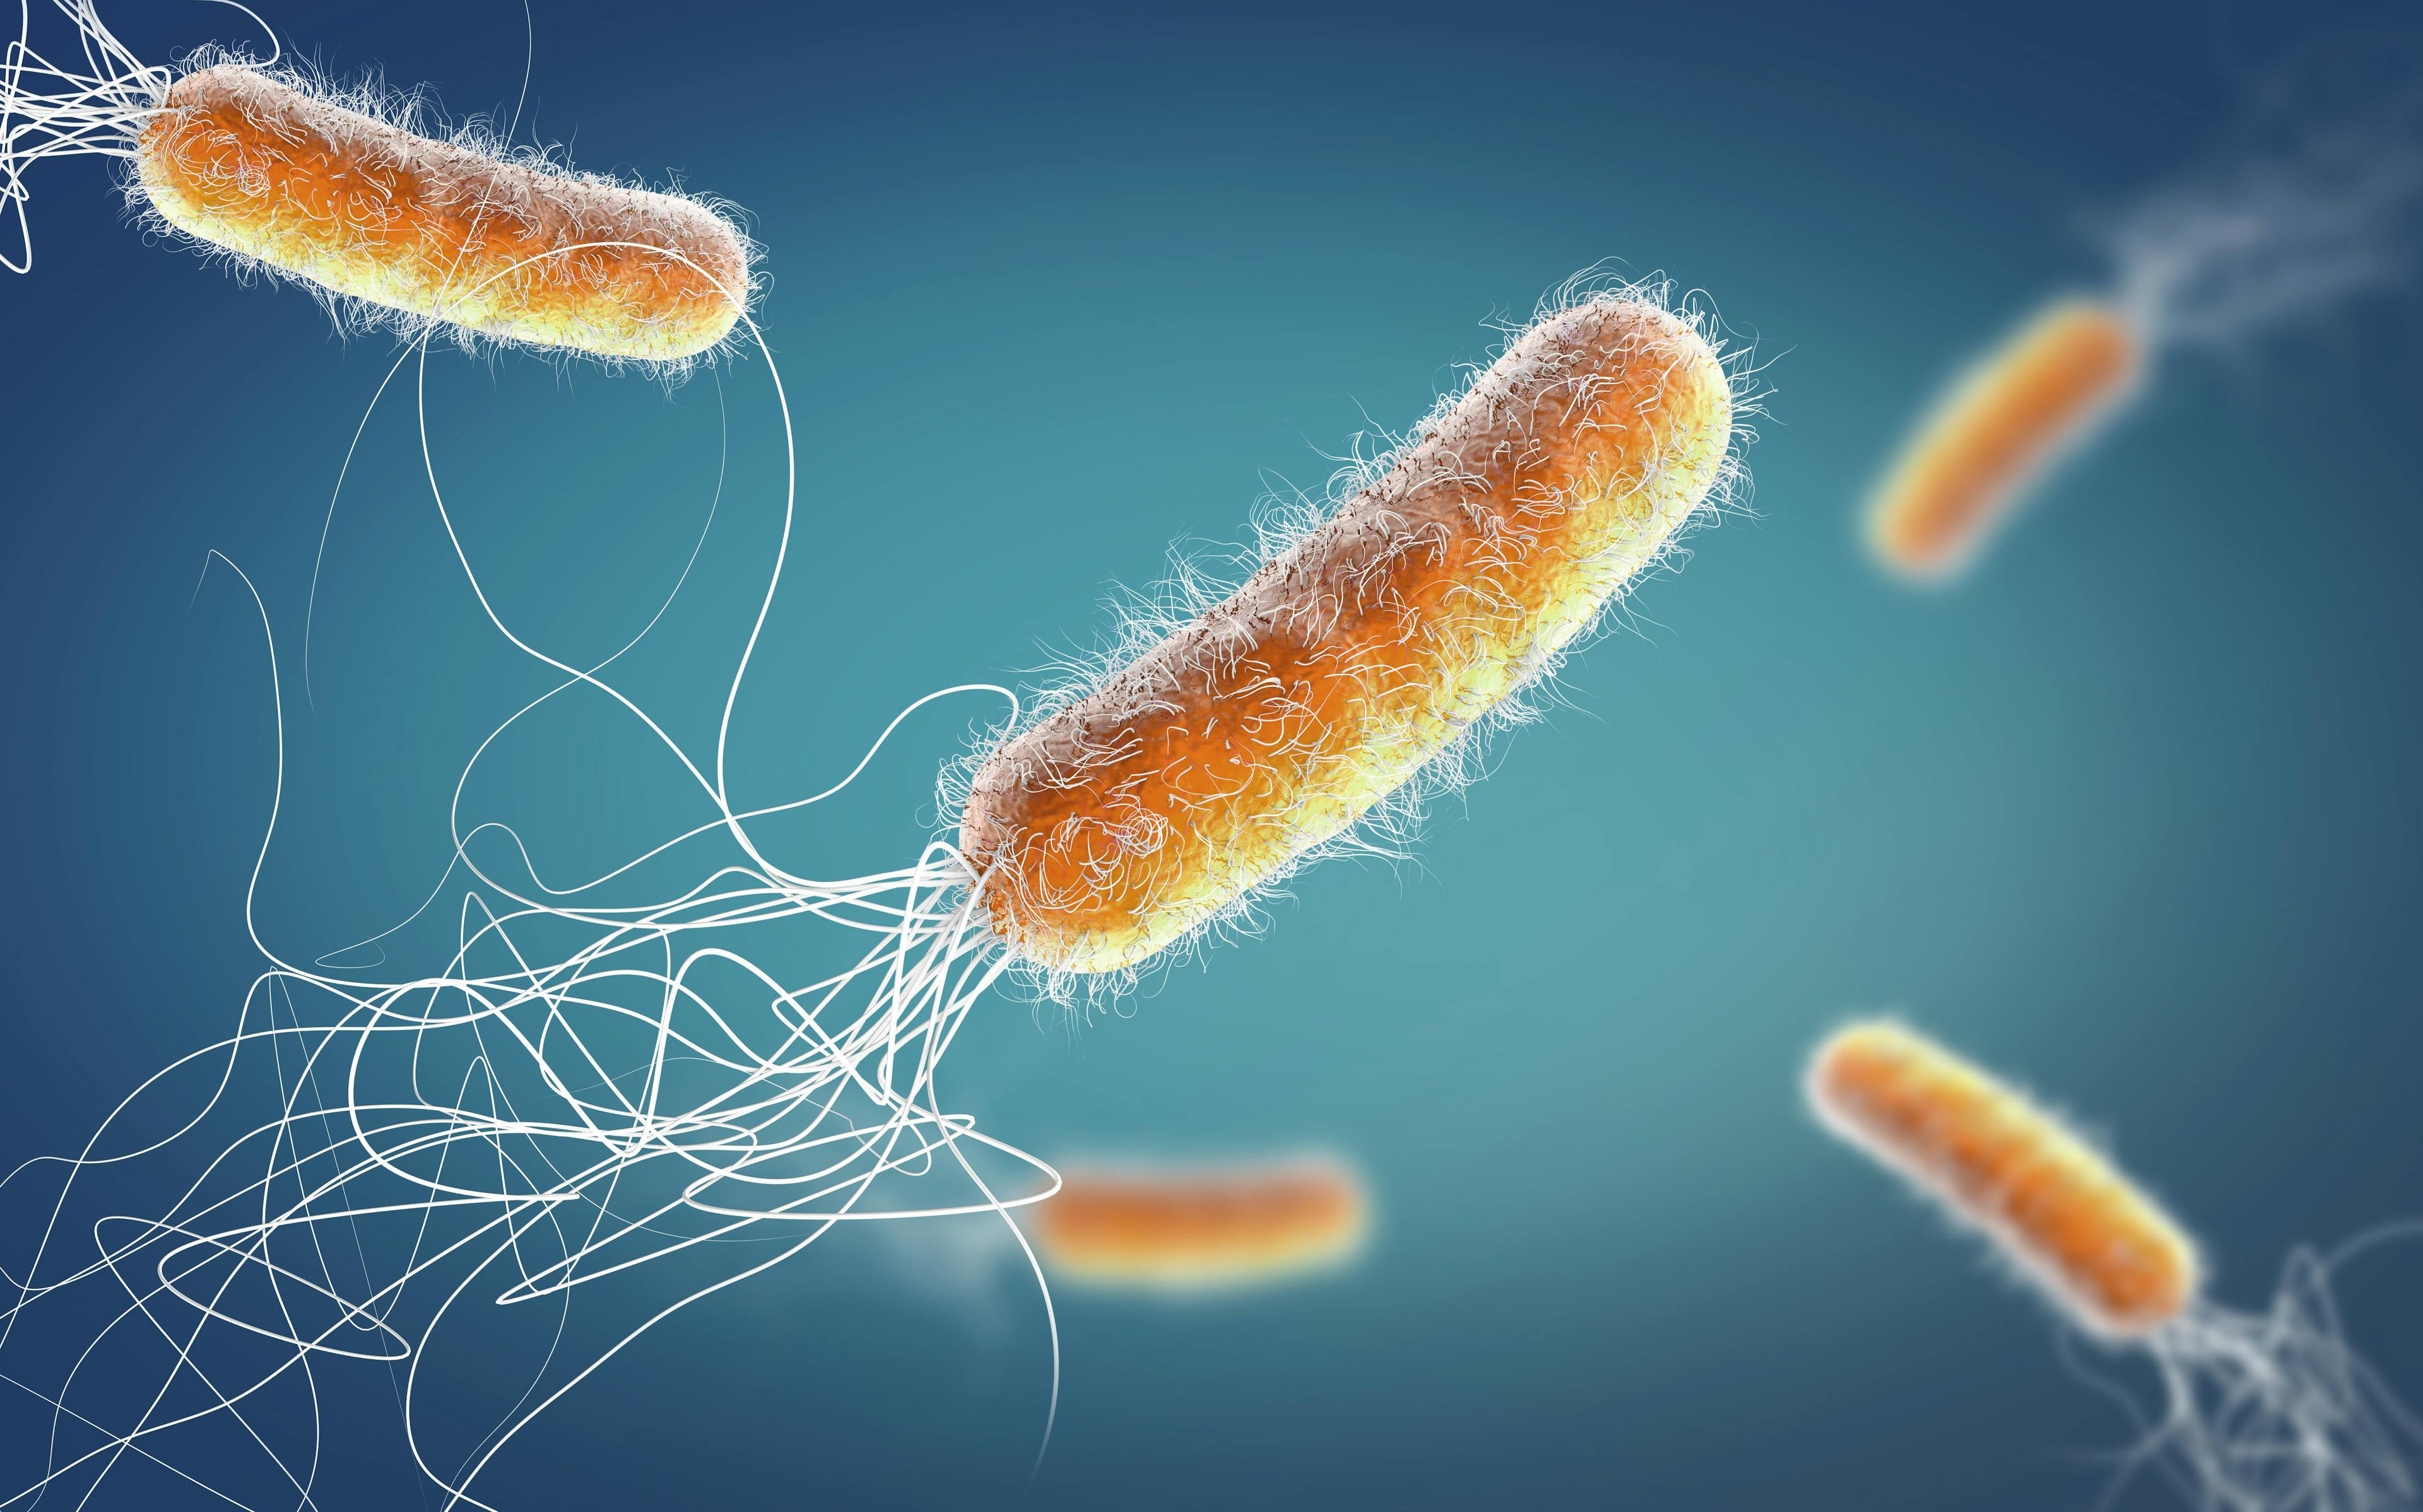 Expert Reviews Clinical Scenarios for the Treatment of Antimicrobial-Resistant Gram-Negative Infections Outside of Current Guidelines